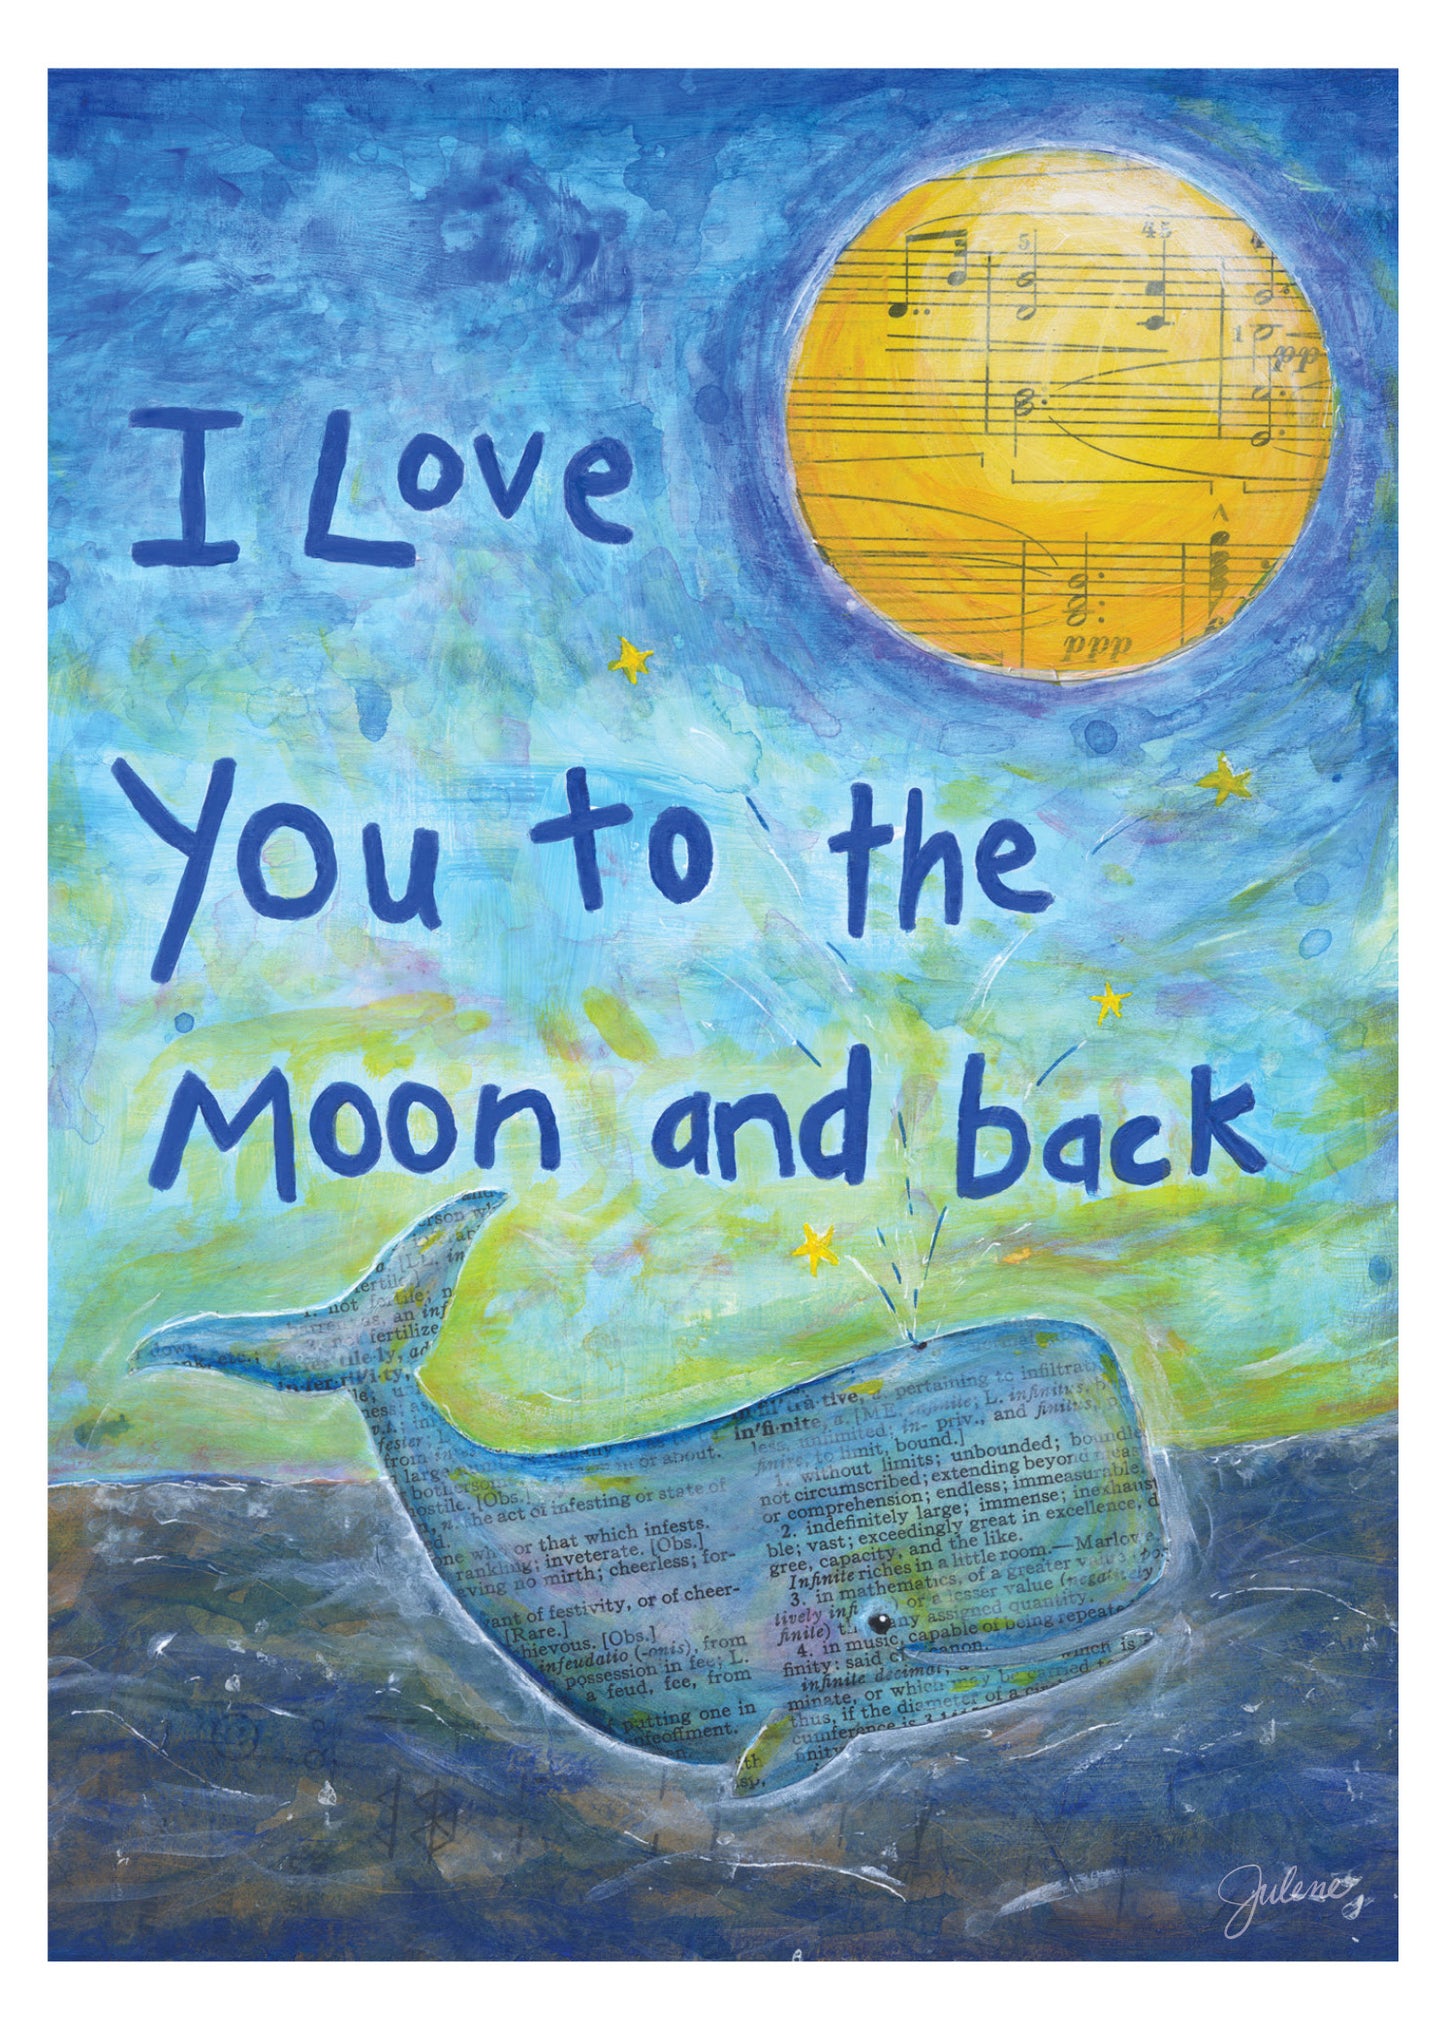 Love You to the Moon greeting card